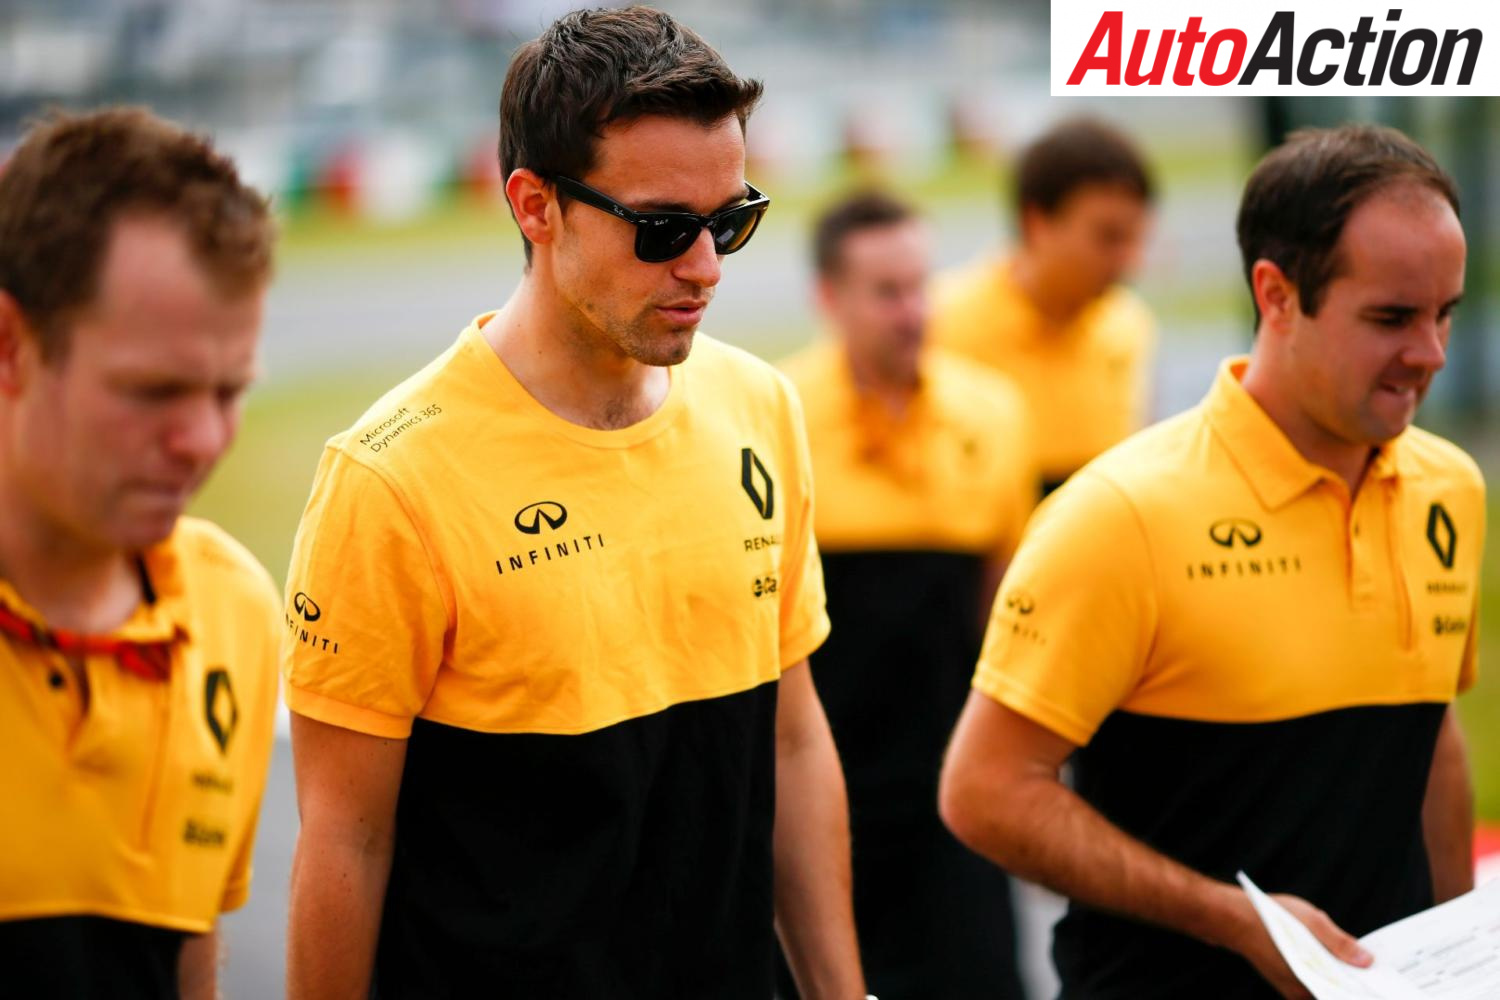 Jolyon Palmer confirms Japanese Grand Prix will be his last with Renault - Photo: LAT